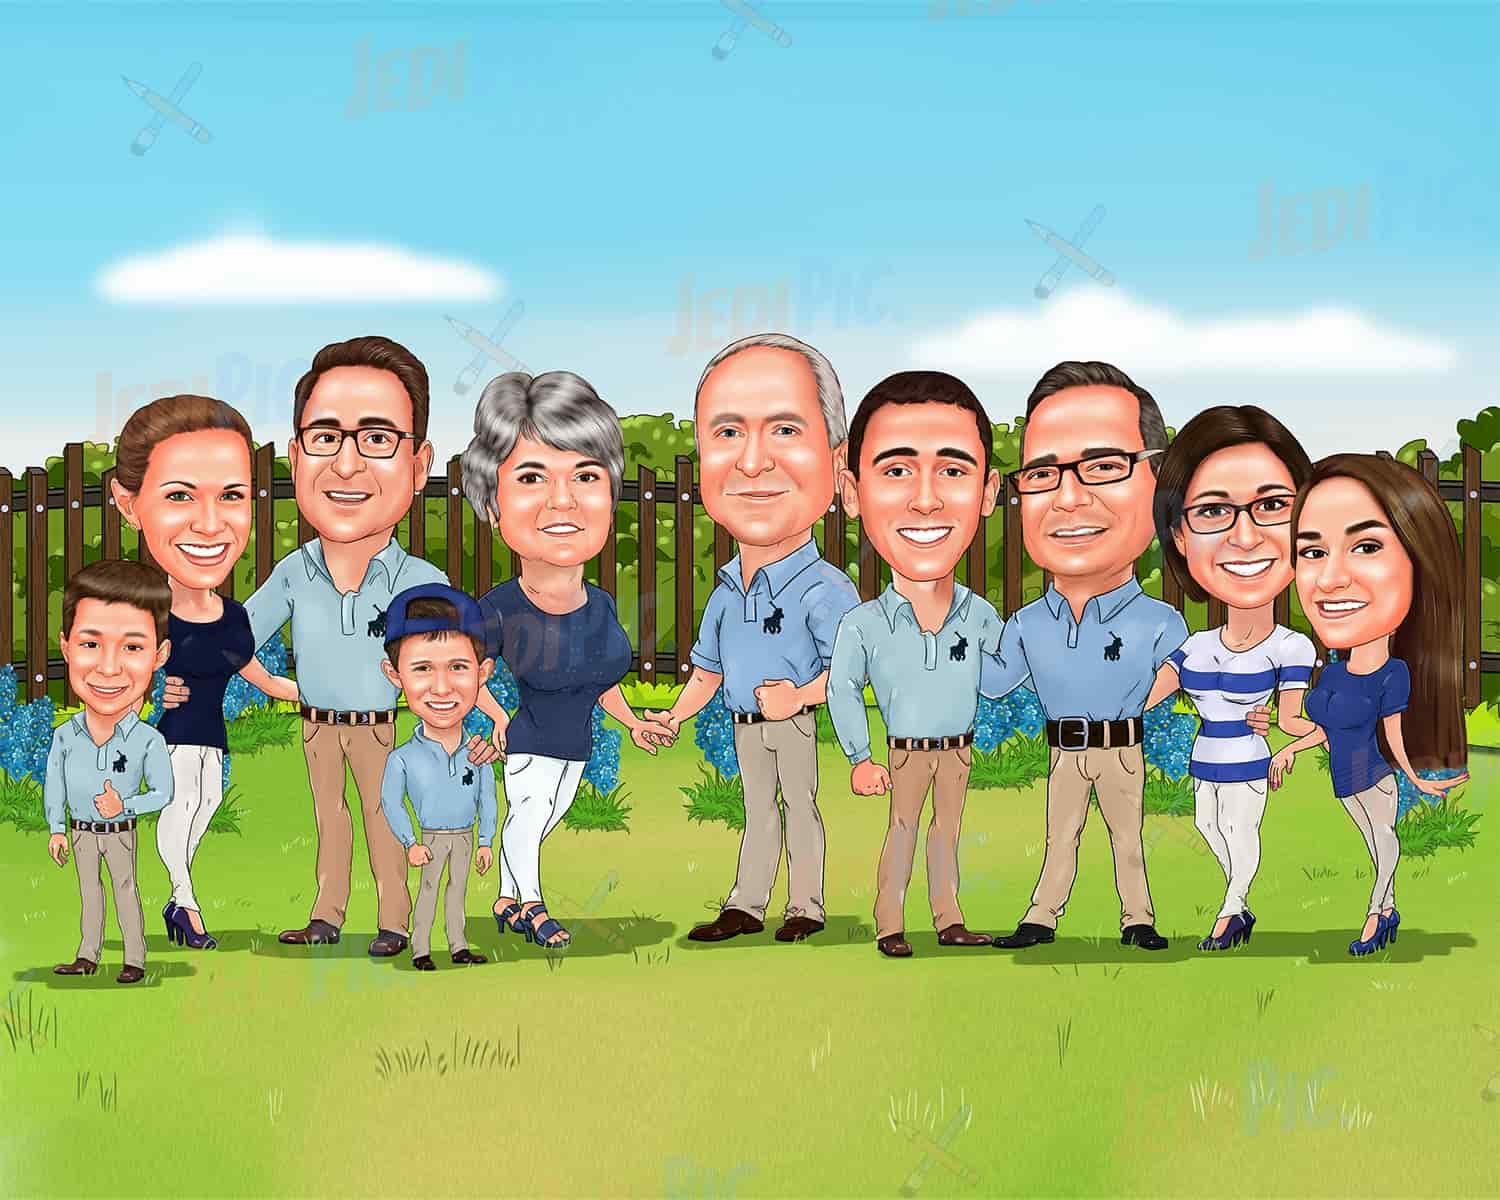 Group Caricature with Custom Background from Photos in Digital Style